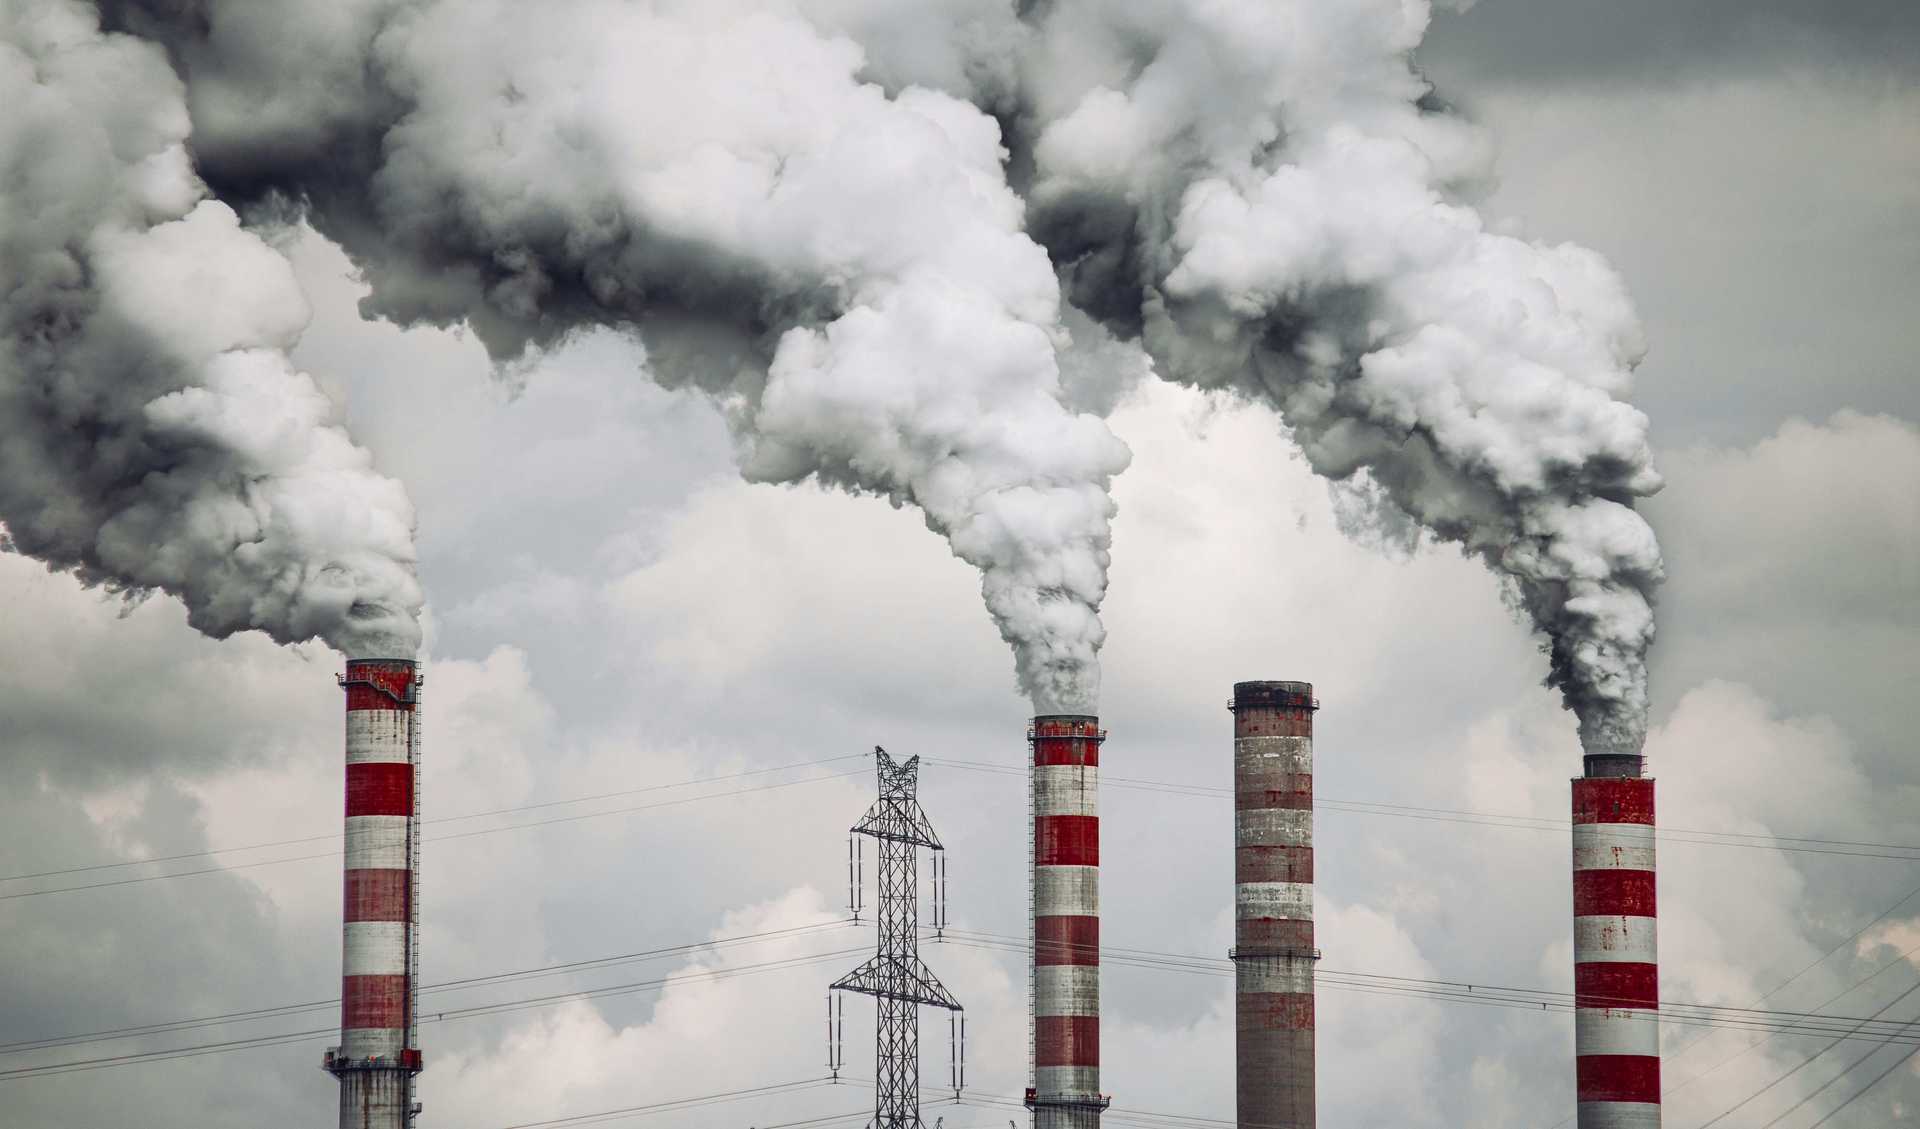 Smoking industrial chimneys in Poland pollute the air